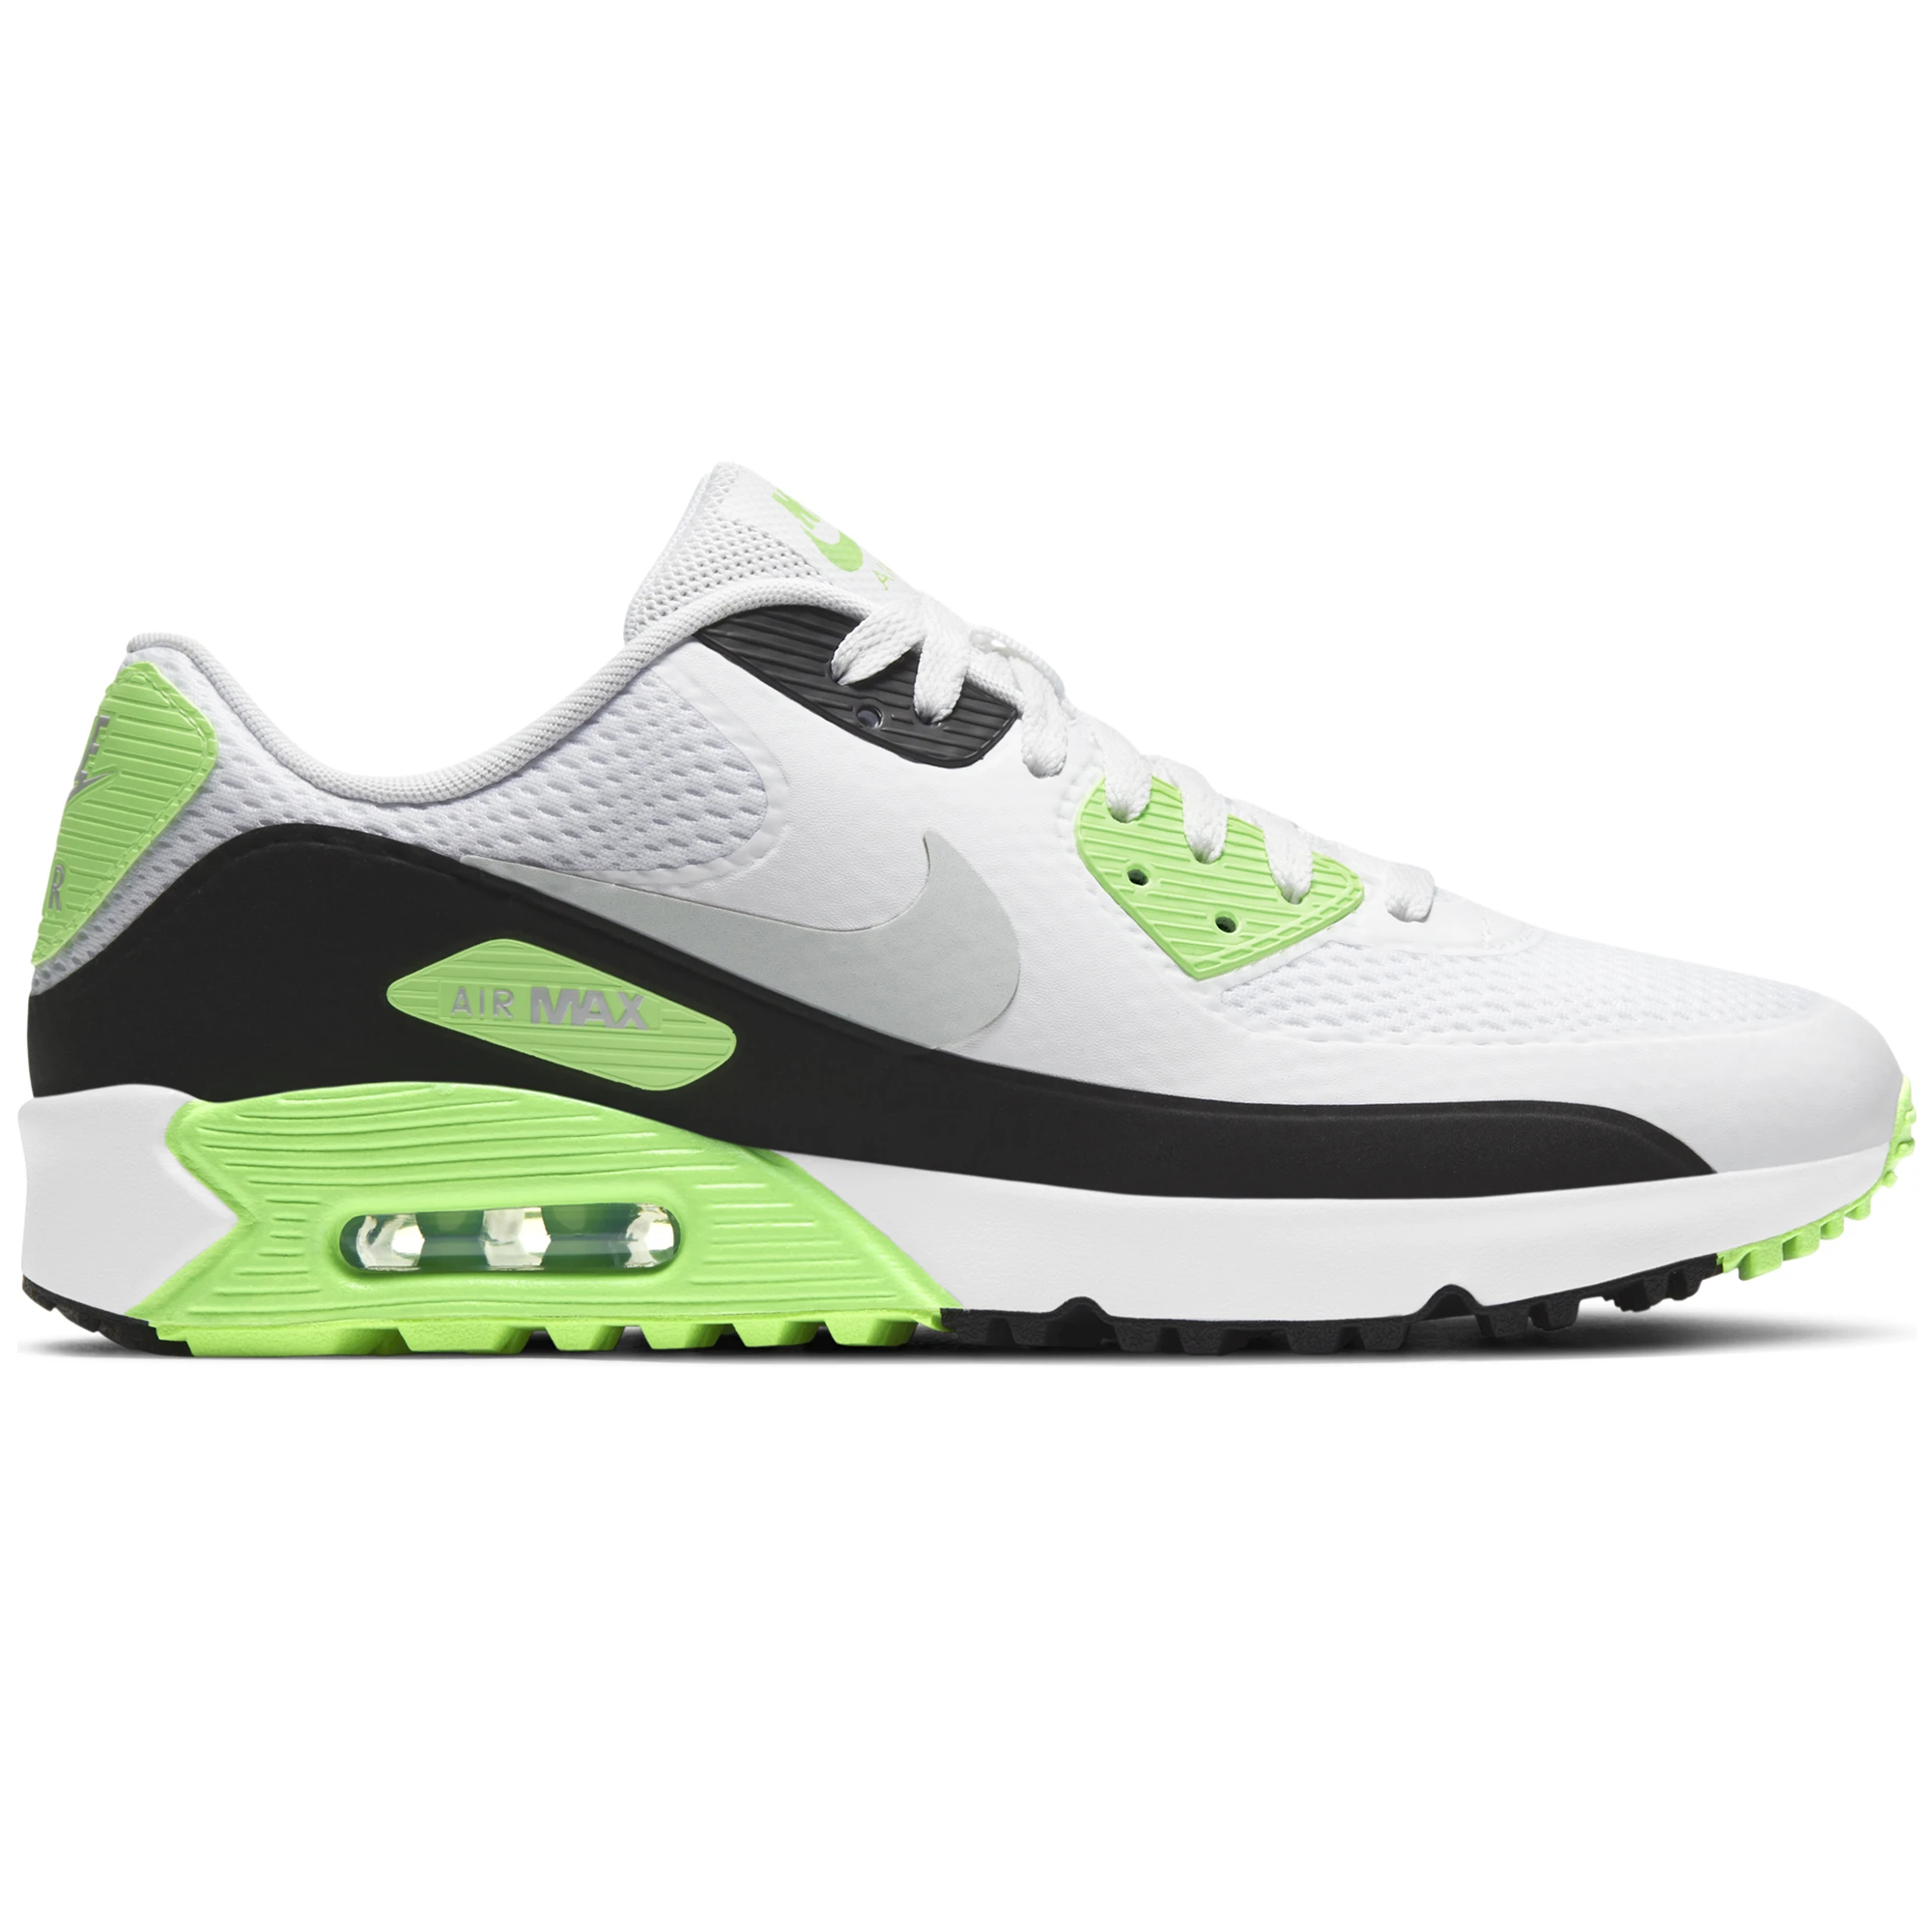 Buy > nike golf shoes lime green > in stock